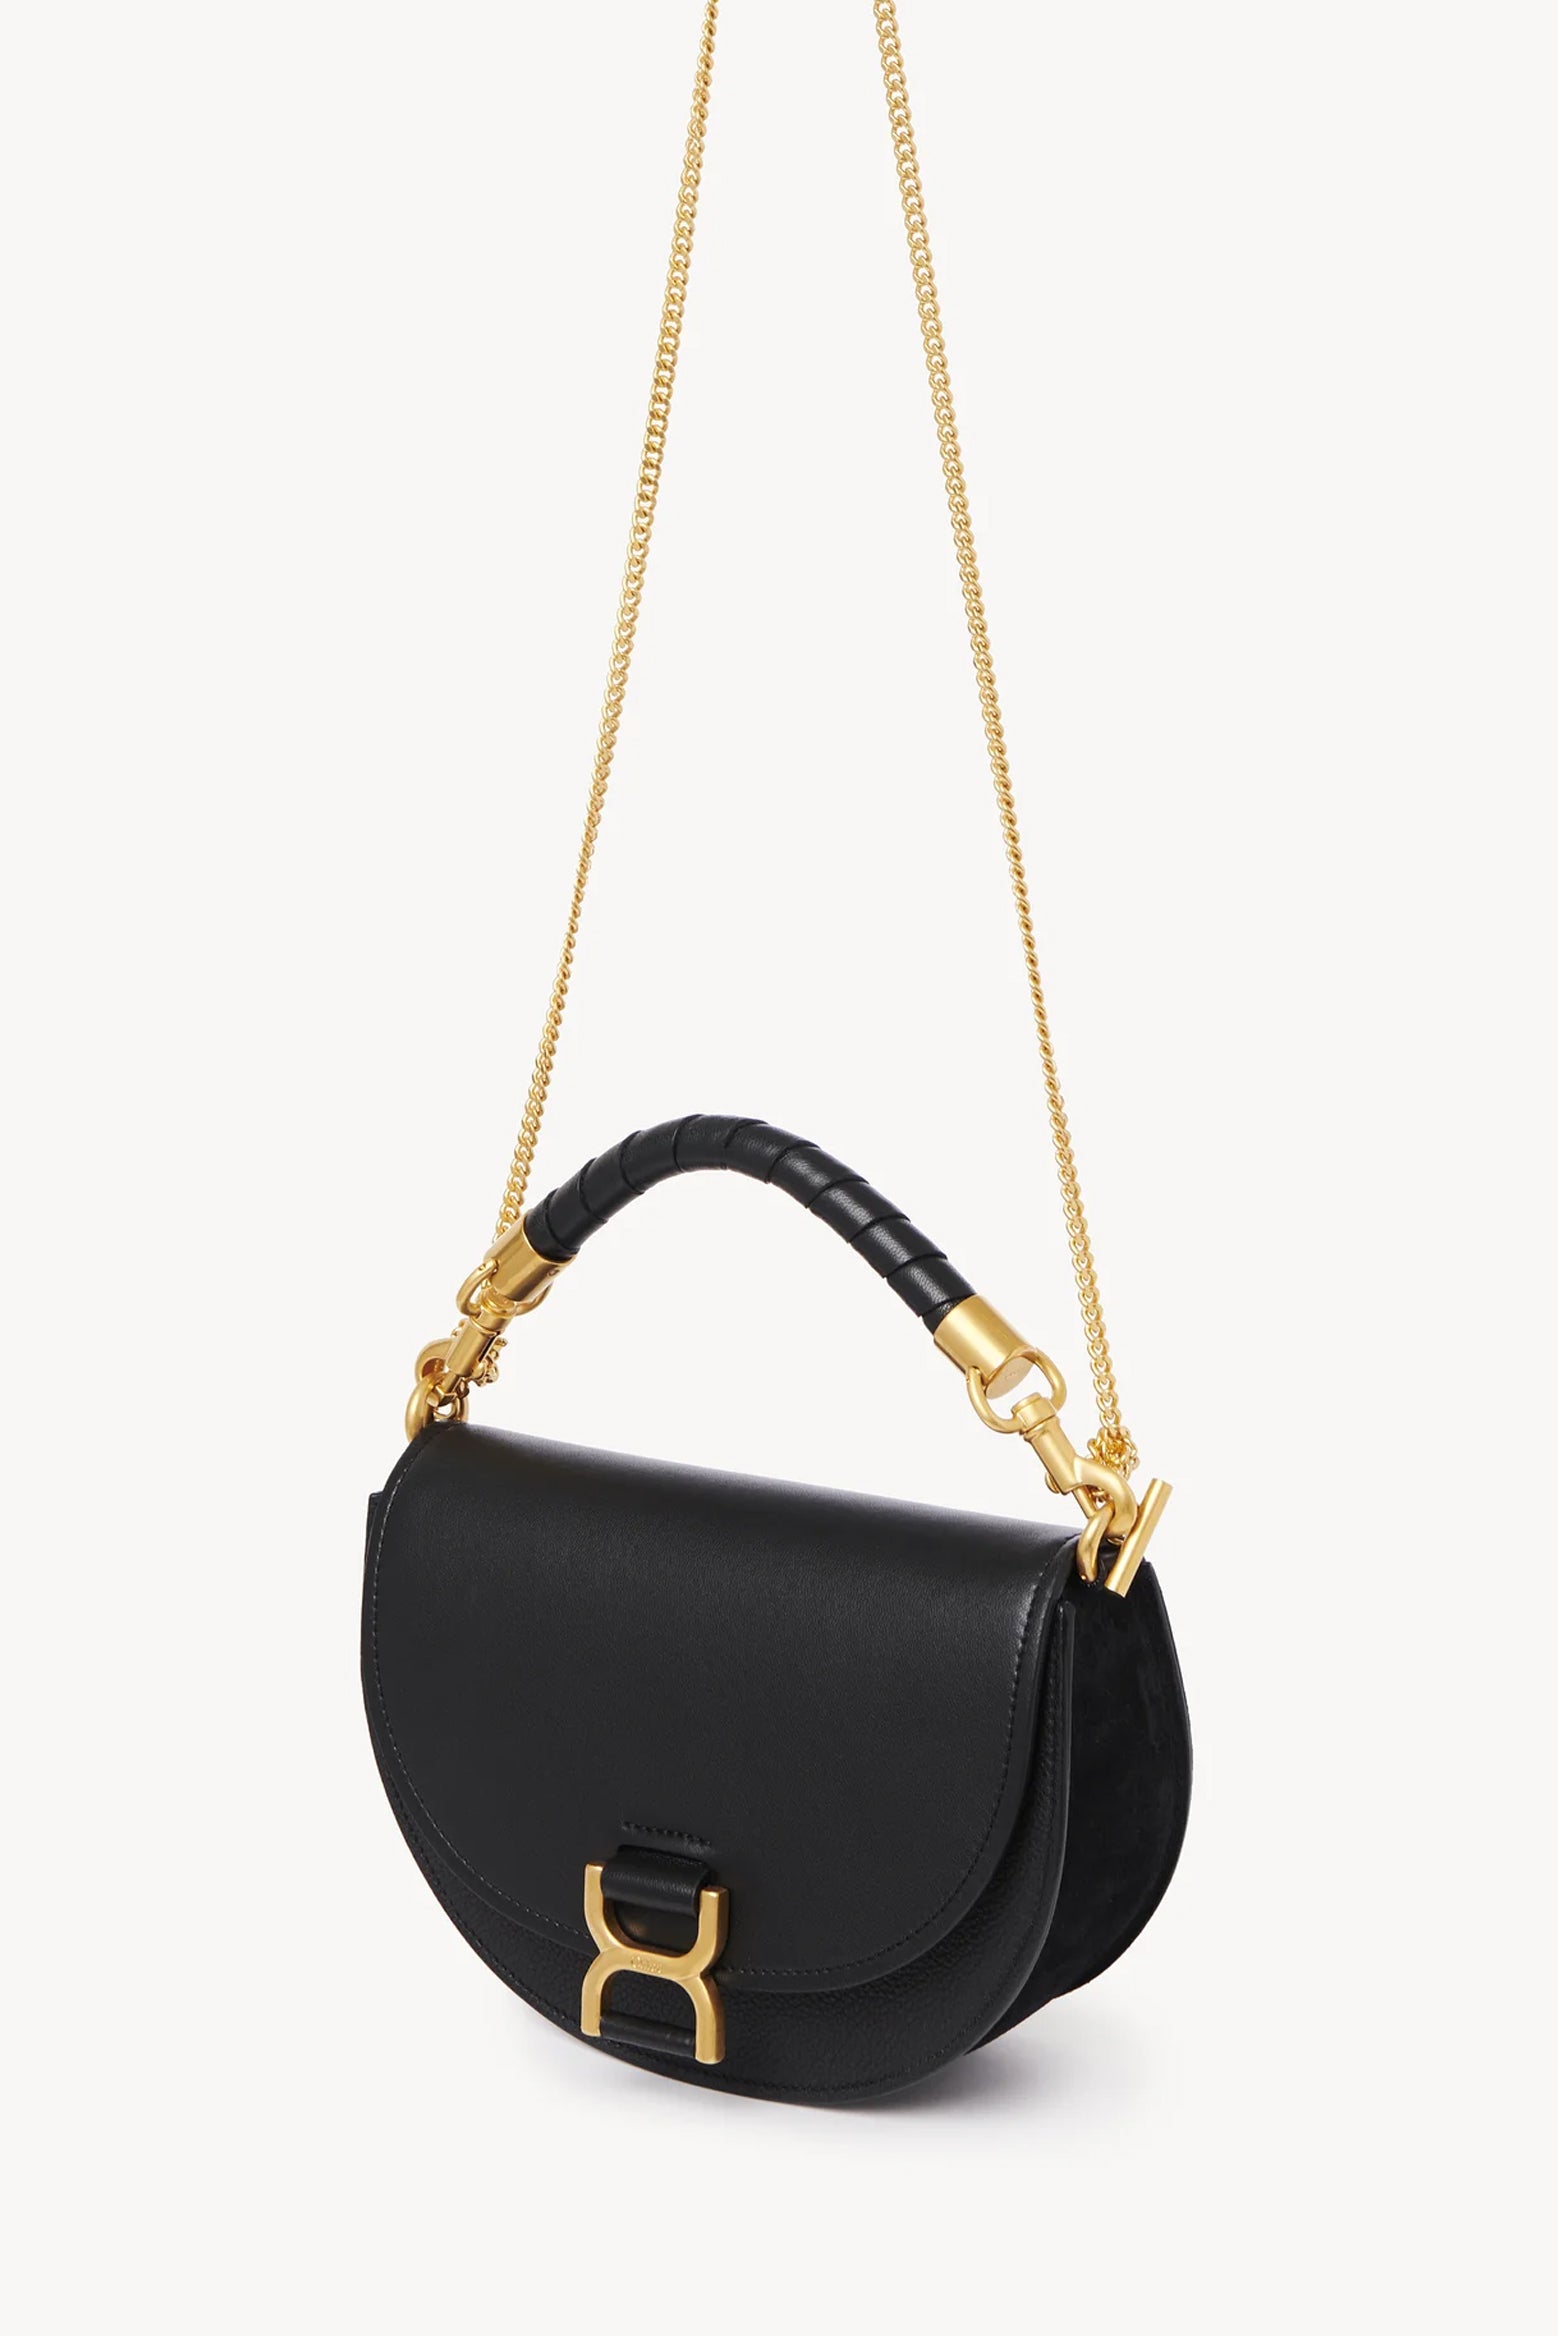 Chloé Marcie Chain Flap Bag in Black available at The New Trend Australia.